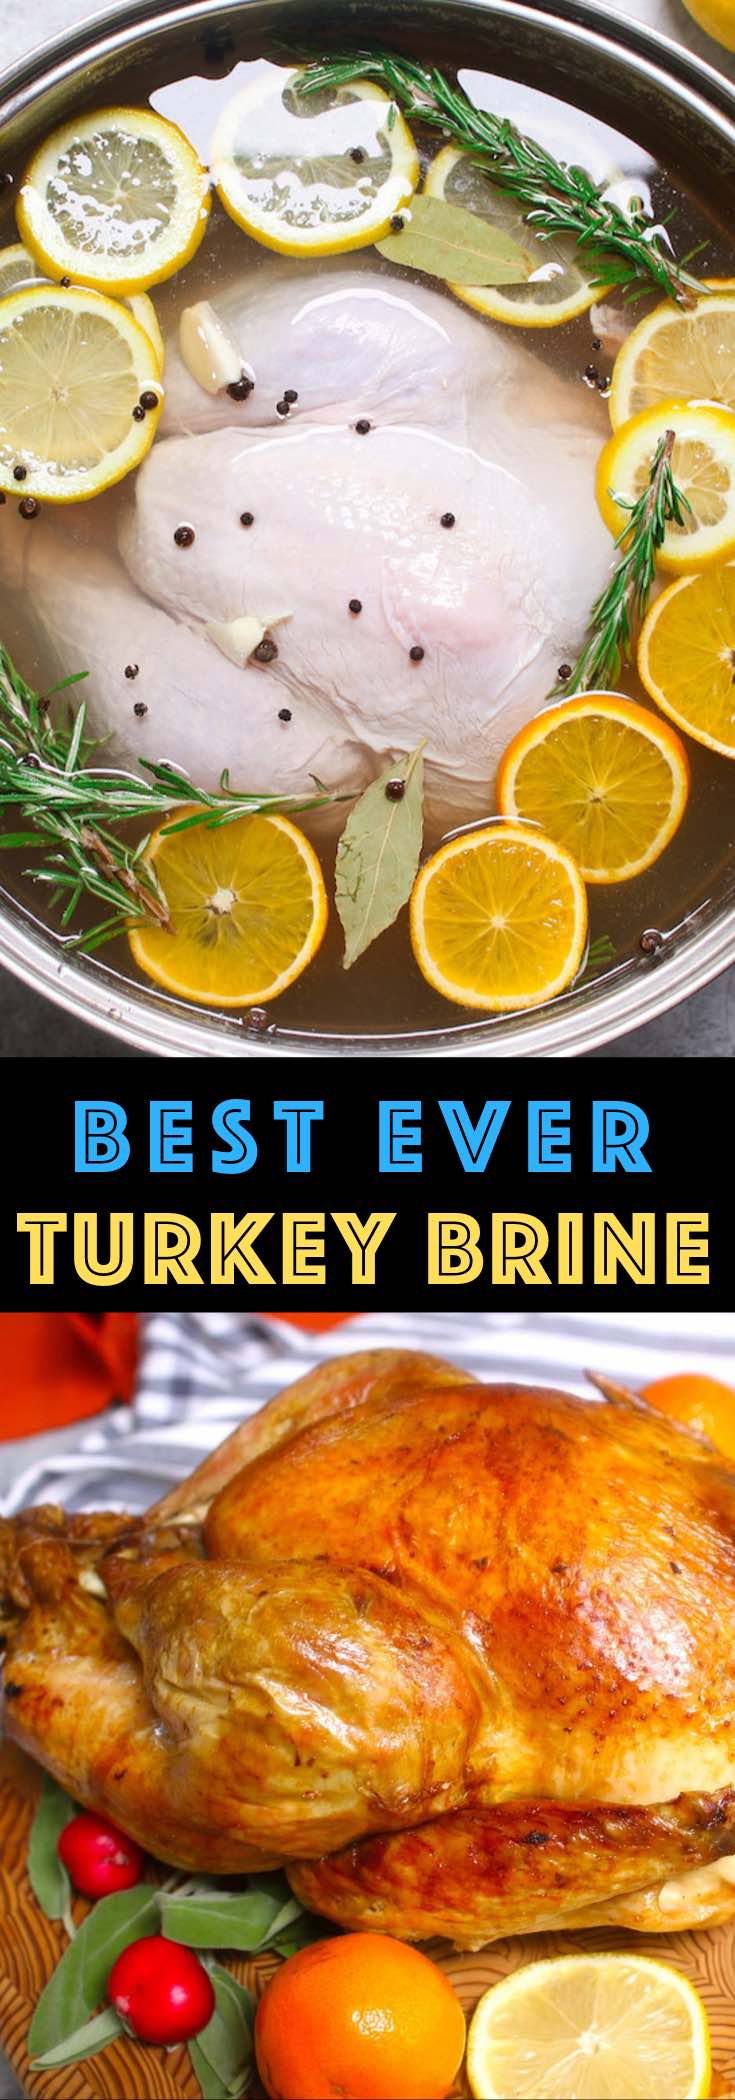 A great turkey brine is the first step to getting the perfect tender and juicy turkey, whether roasted or smoked. Learn how to brine a turkey with this quick and easy recipe made with salt, water, brown sugar, apple cider vinegar, citrus, and aromatics. No more dried-out turkey!